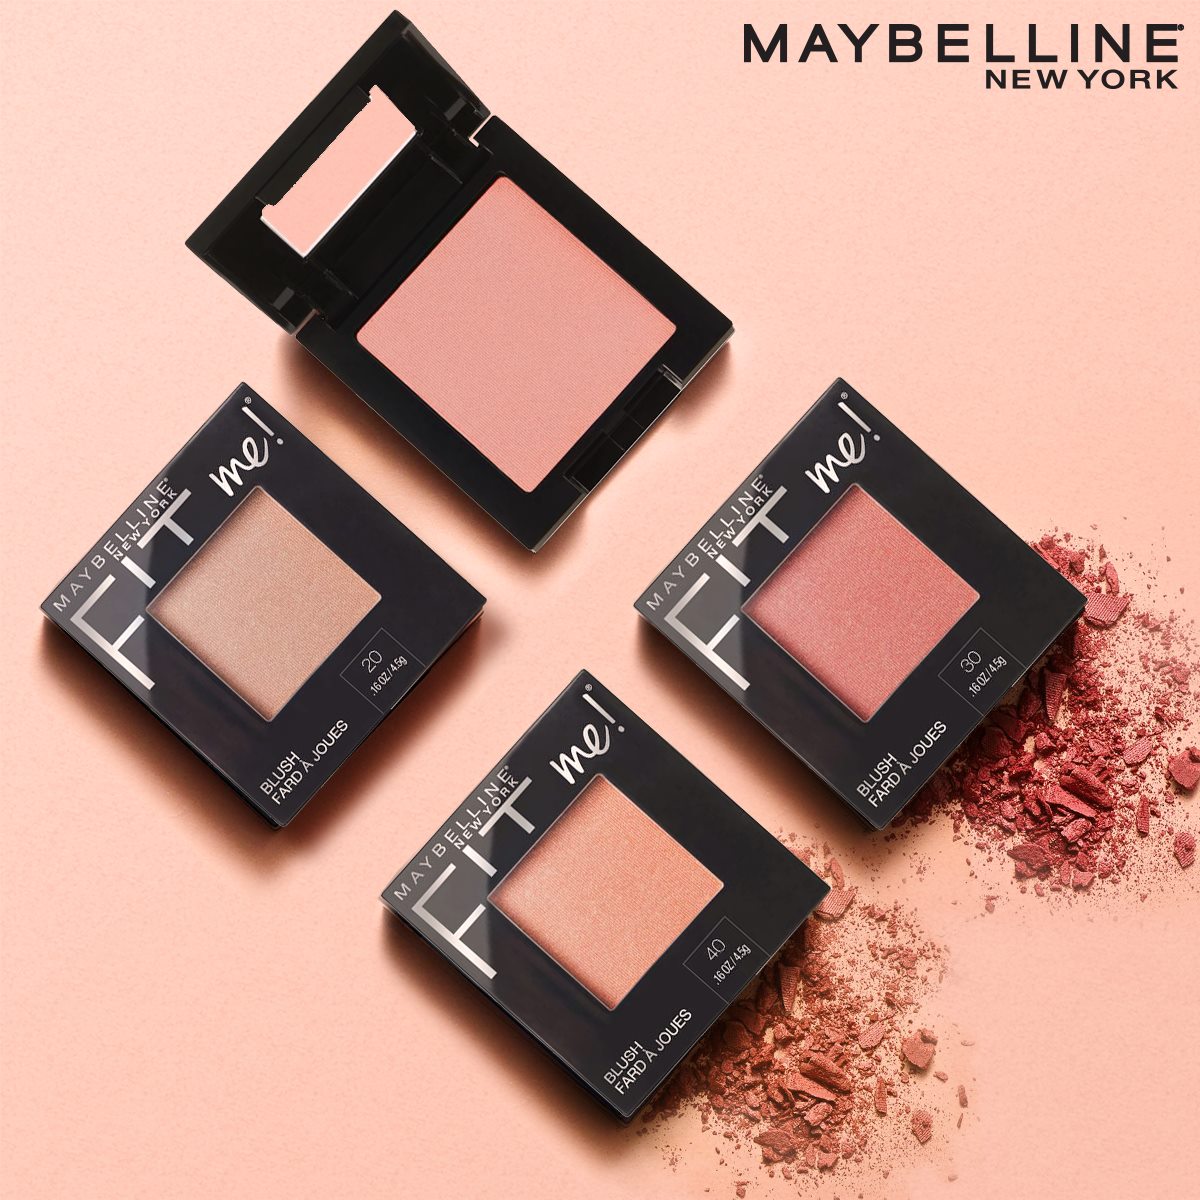 Fit Me Maybelline New York